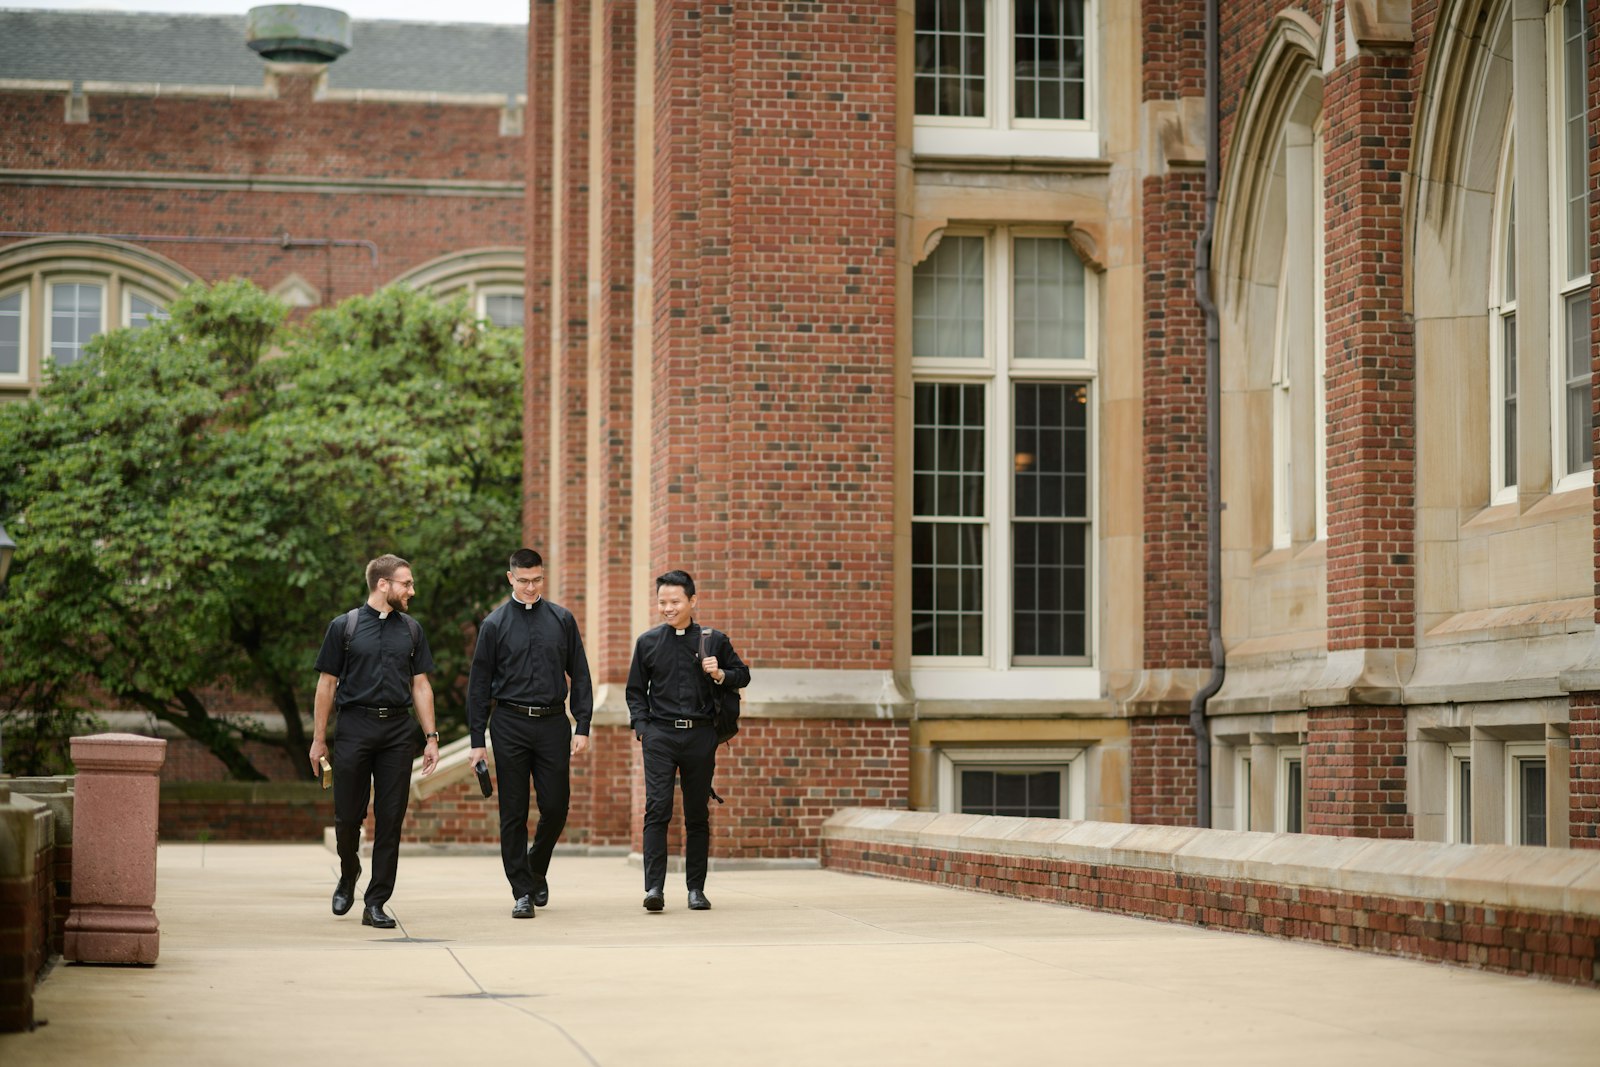 Seminarians walk the porch at Sacred Heart Major Seminary in Detroit. It typically takes seven or eight years for a man to be formed for priestly ministry, meaning there are no "quick fixes" to the vocation shortage, the archbishop said. Nevertheless, God will provide for the archdiocese's needs, he added. (Marek Dziekonski | Special to Detroit Catholic)